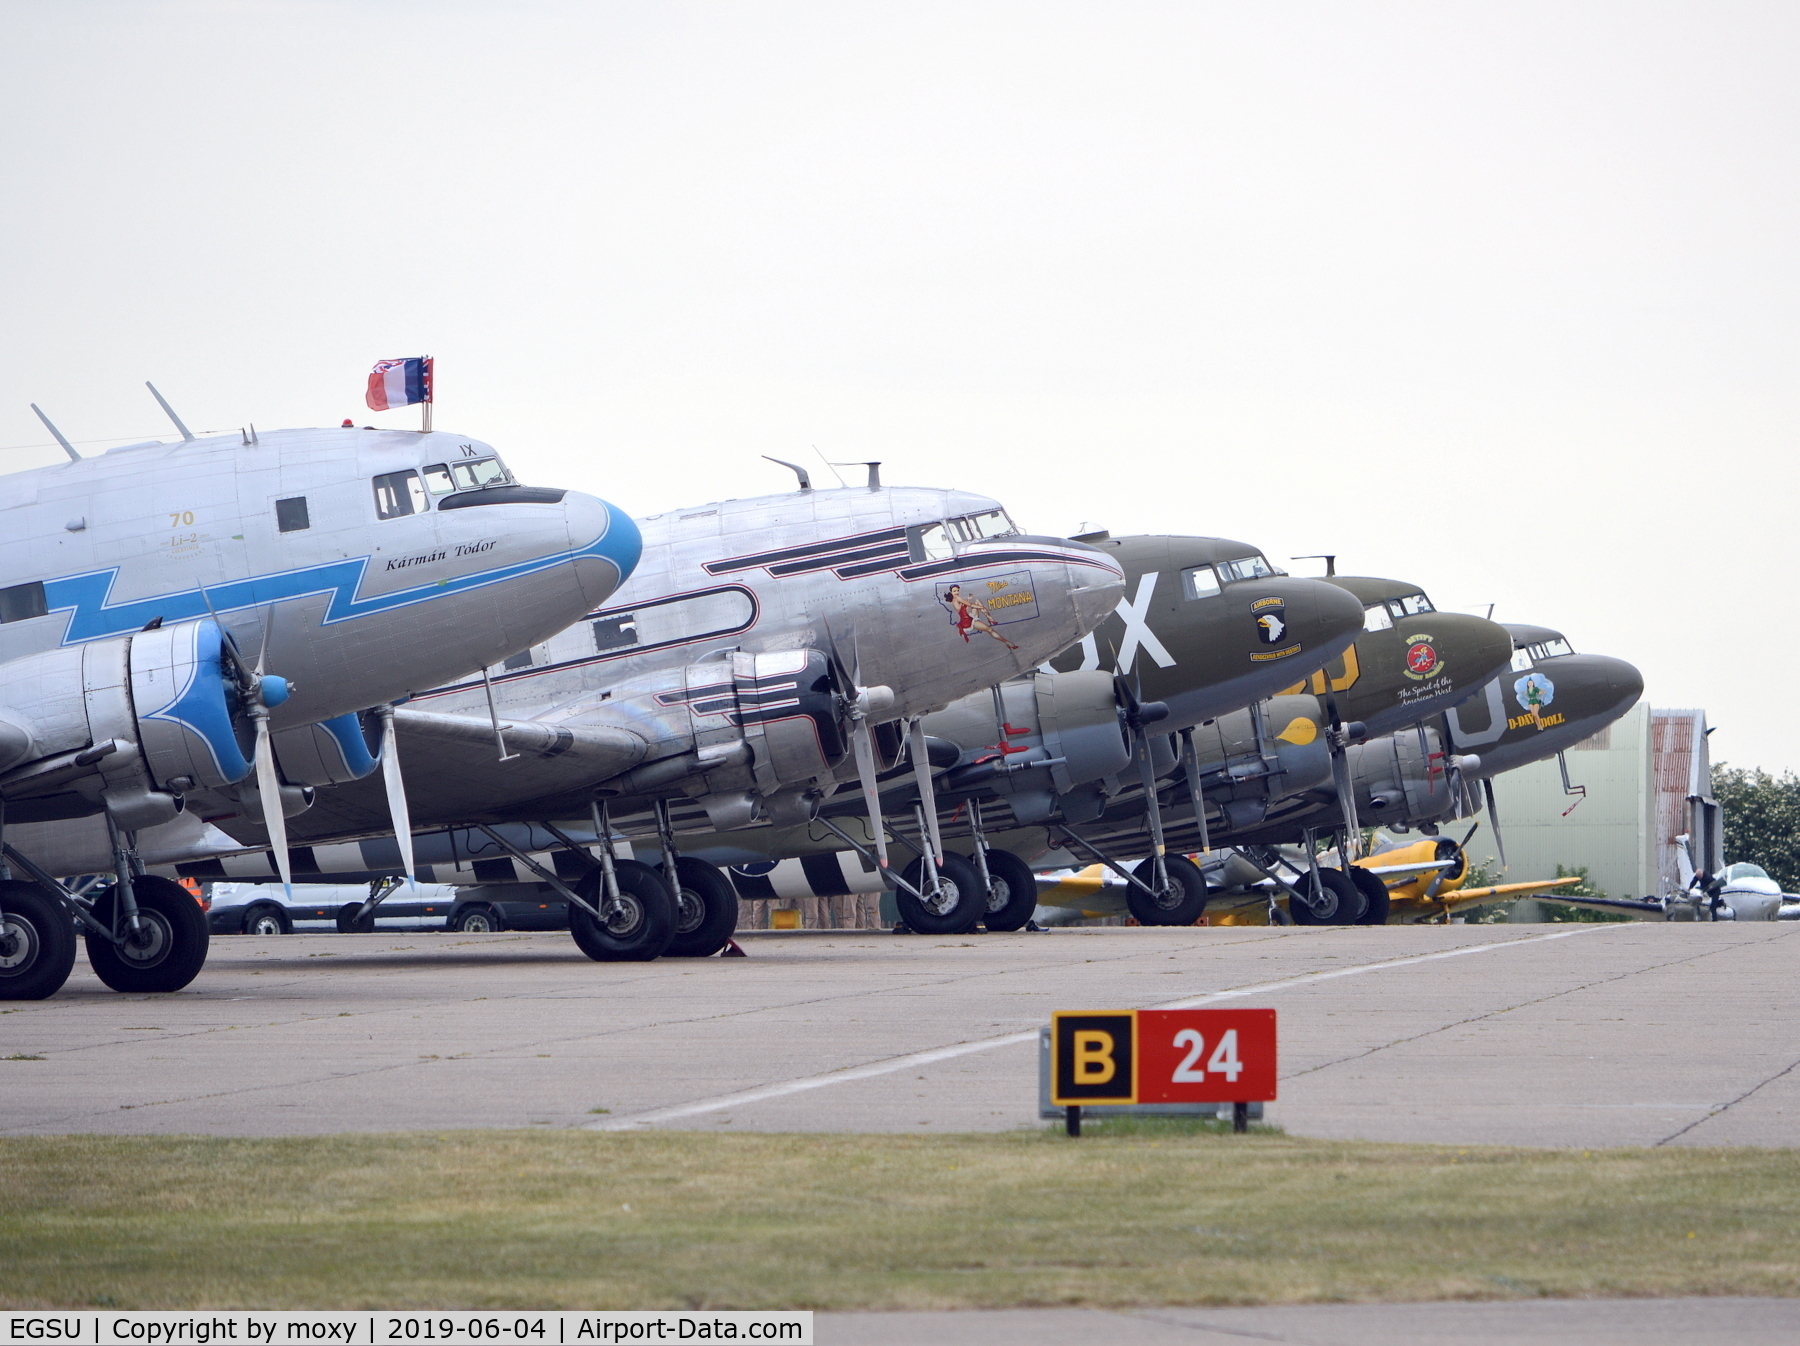 Duxford Airport, Cambridge, England United Kingdom (EGSU) - DC3s and an Li-2 lined up at Duxford before flying off to Caen, France on the 5th of June. 